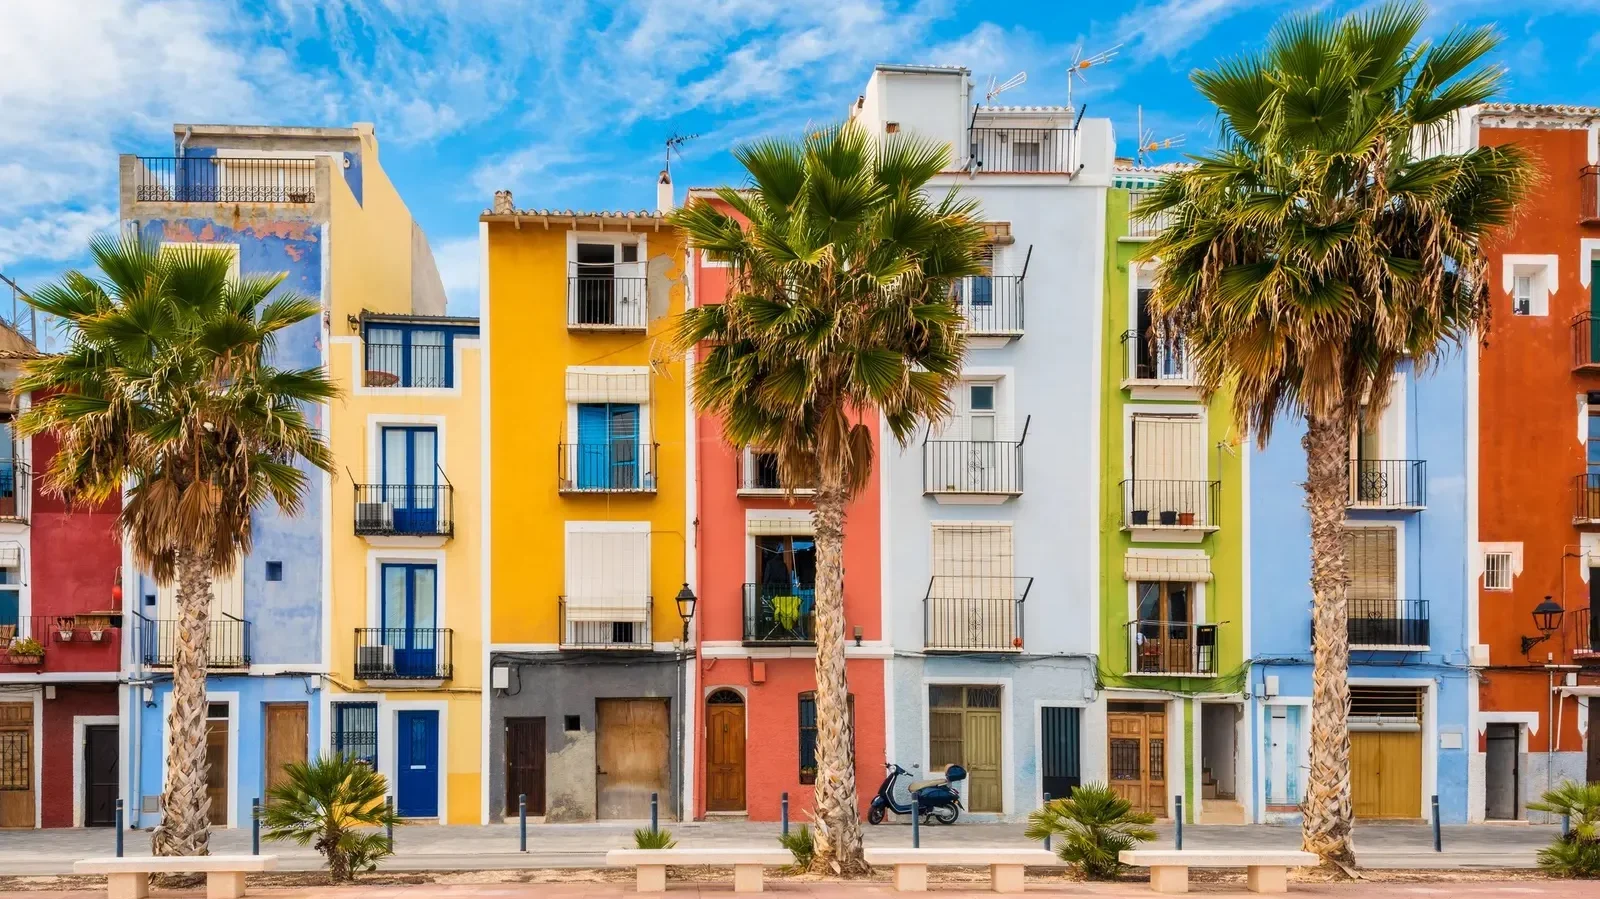 Alicante: The Complete Guide to Living, Sightseeing and Real Estate Investing